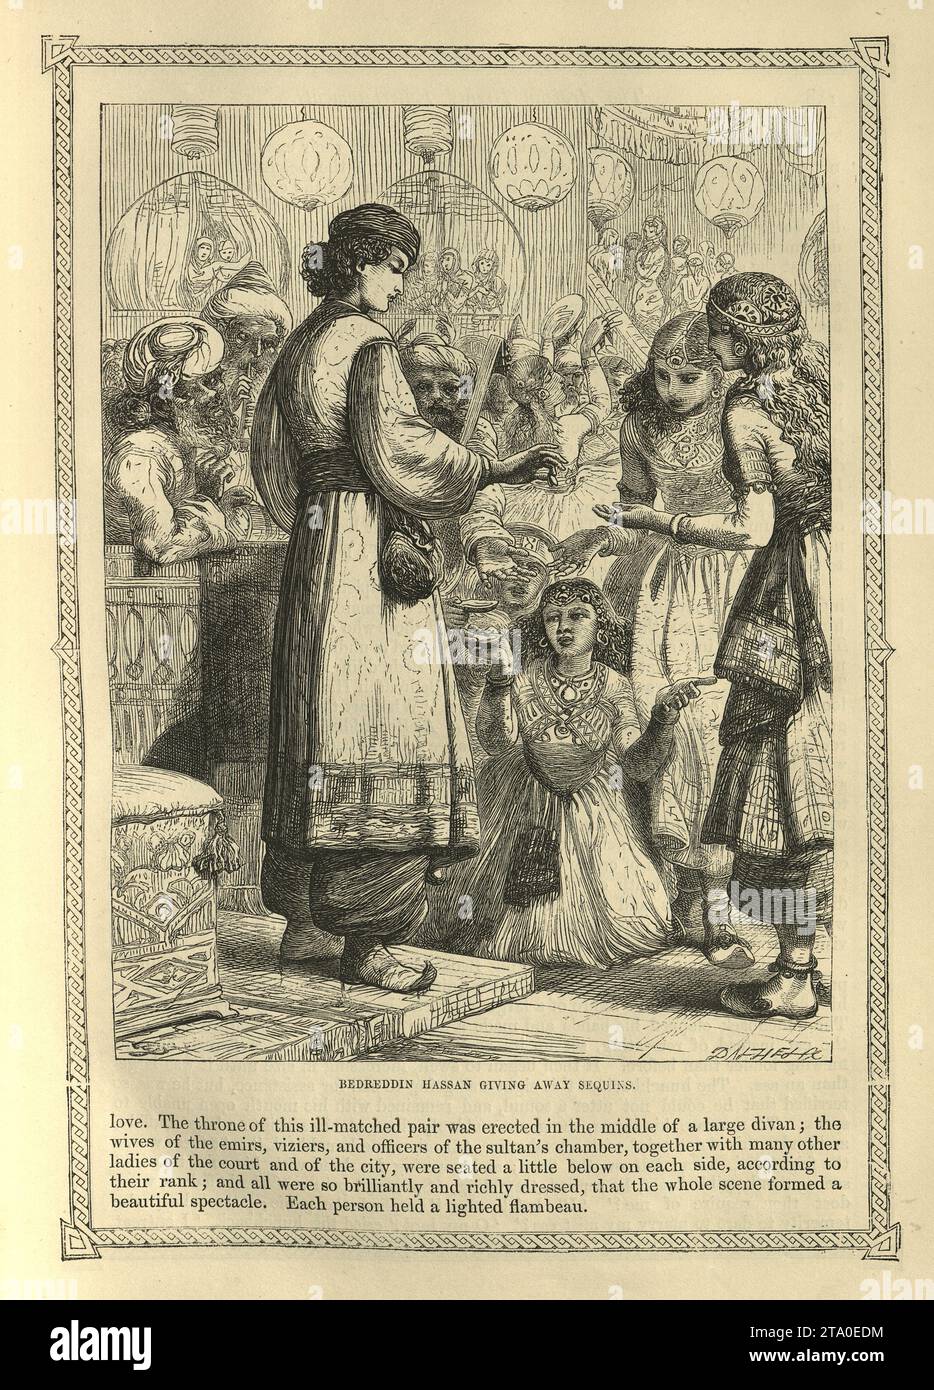 Vintage illustration One Thousand and One Nights, Bedreddin Hassan giving awat sequins, Arabian, Middle Eastern folktales, by The Brothers Dalziel. History of Noureddin Ali and Bedreddin Hassan Stock Photo